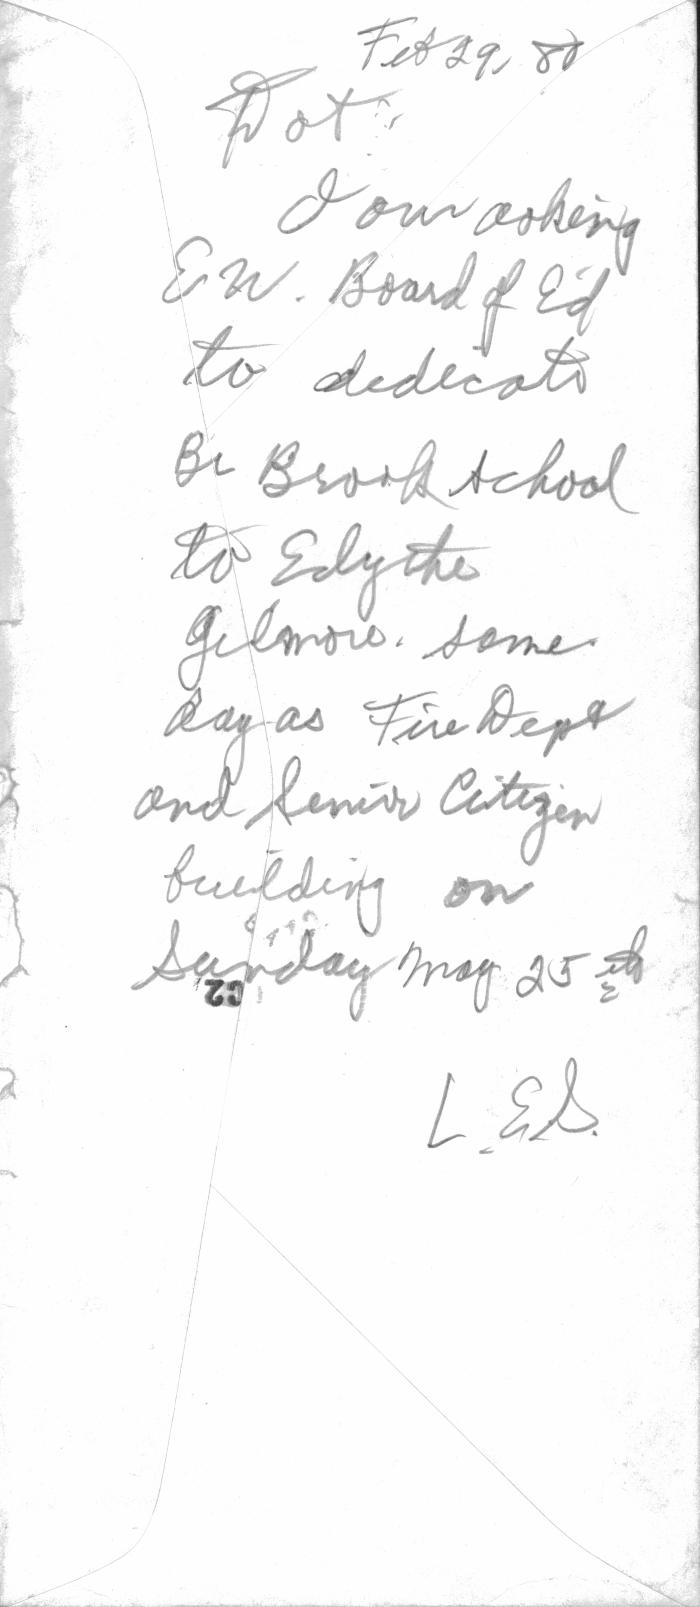 Note  dated February 29, 1980 to Dot asking the East Windsor Board of Education to dedicate the Broad Brook School to Edythe Gilmore. 